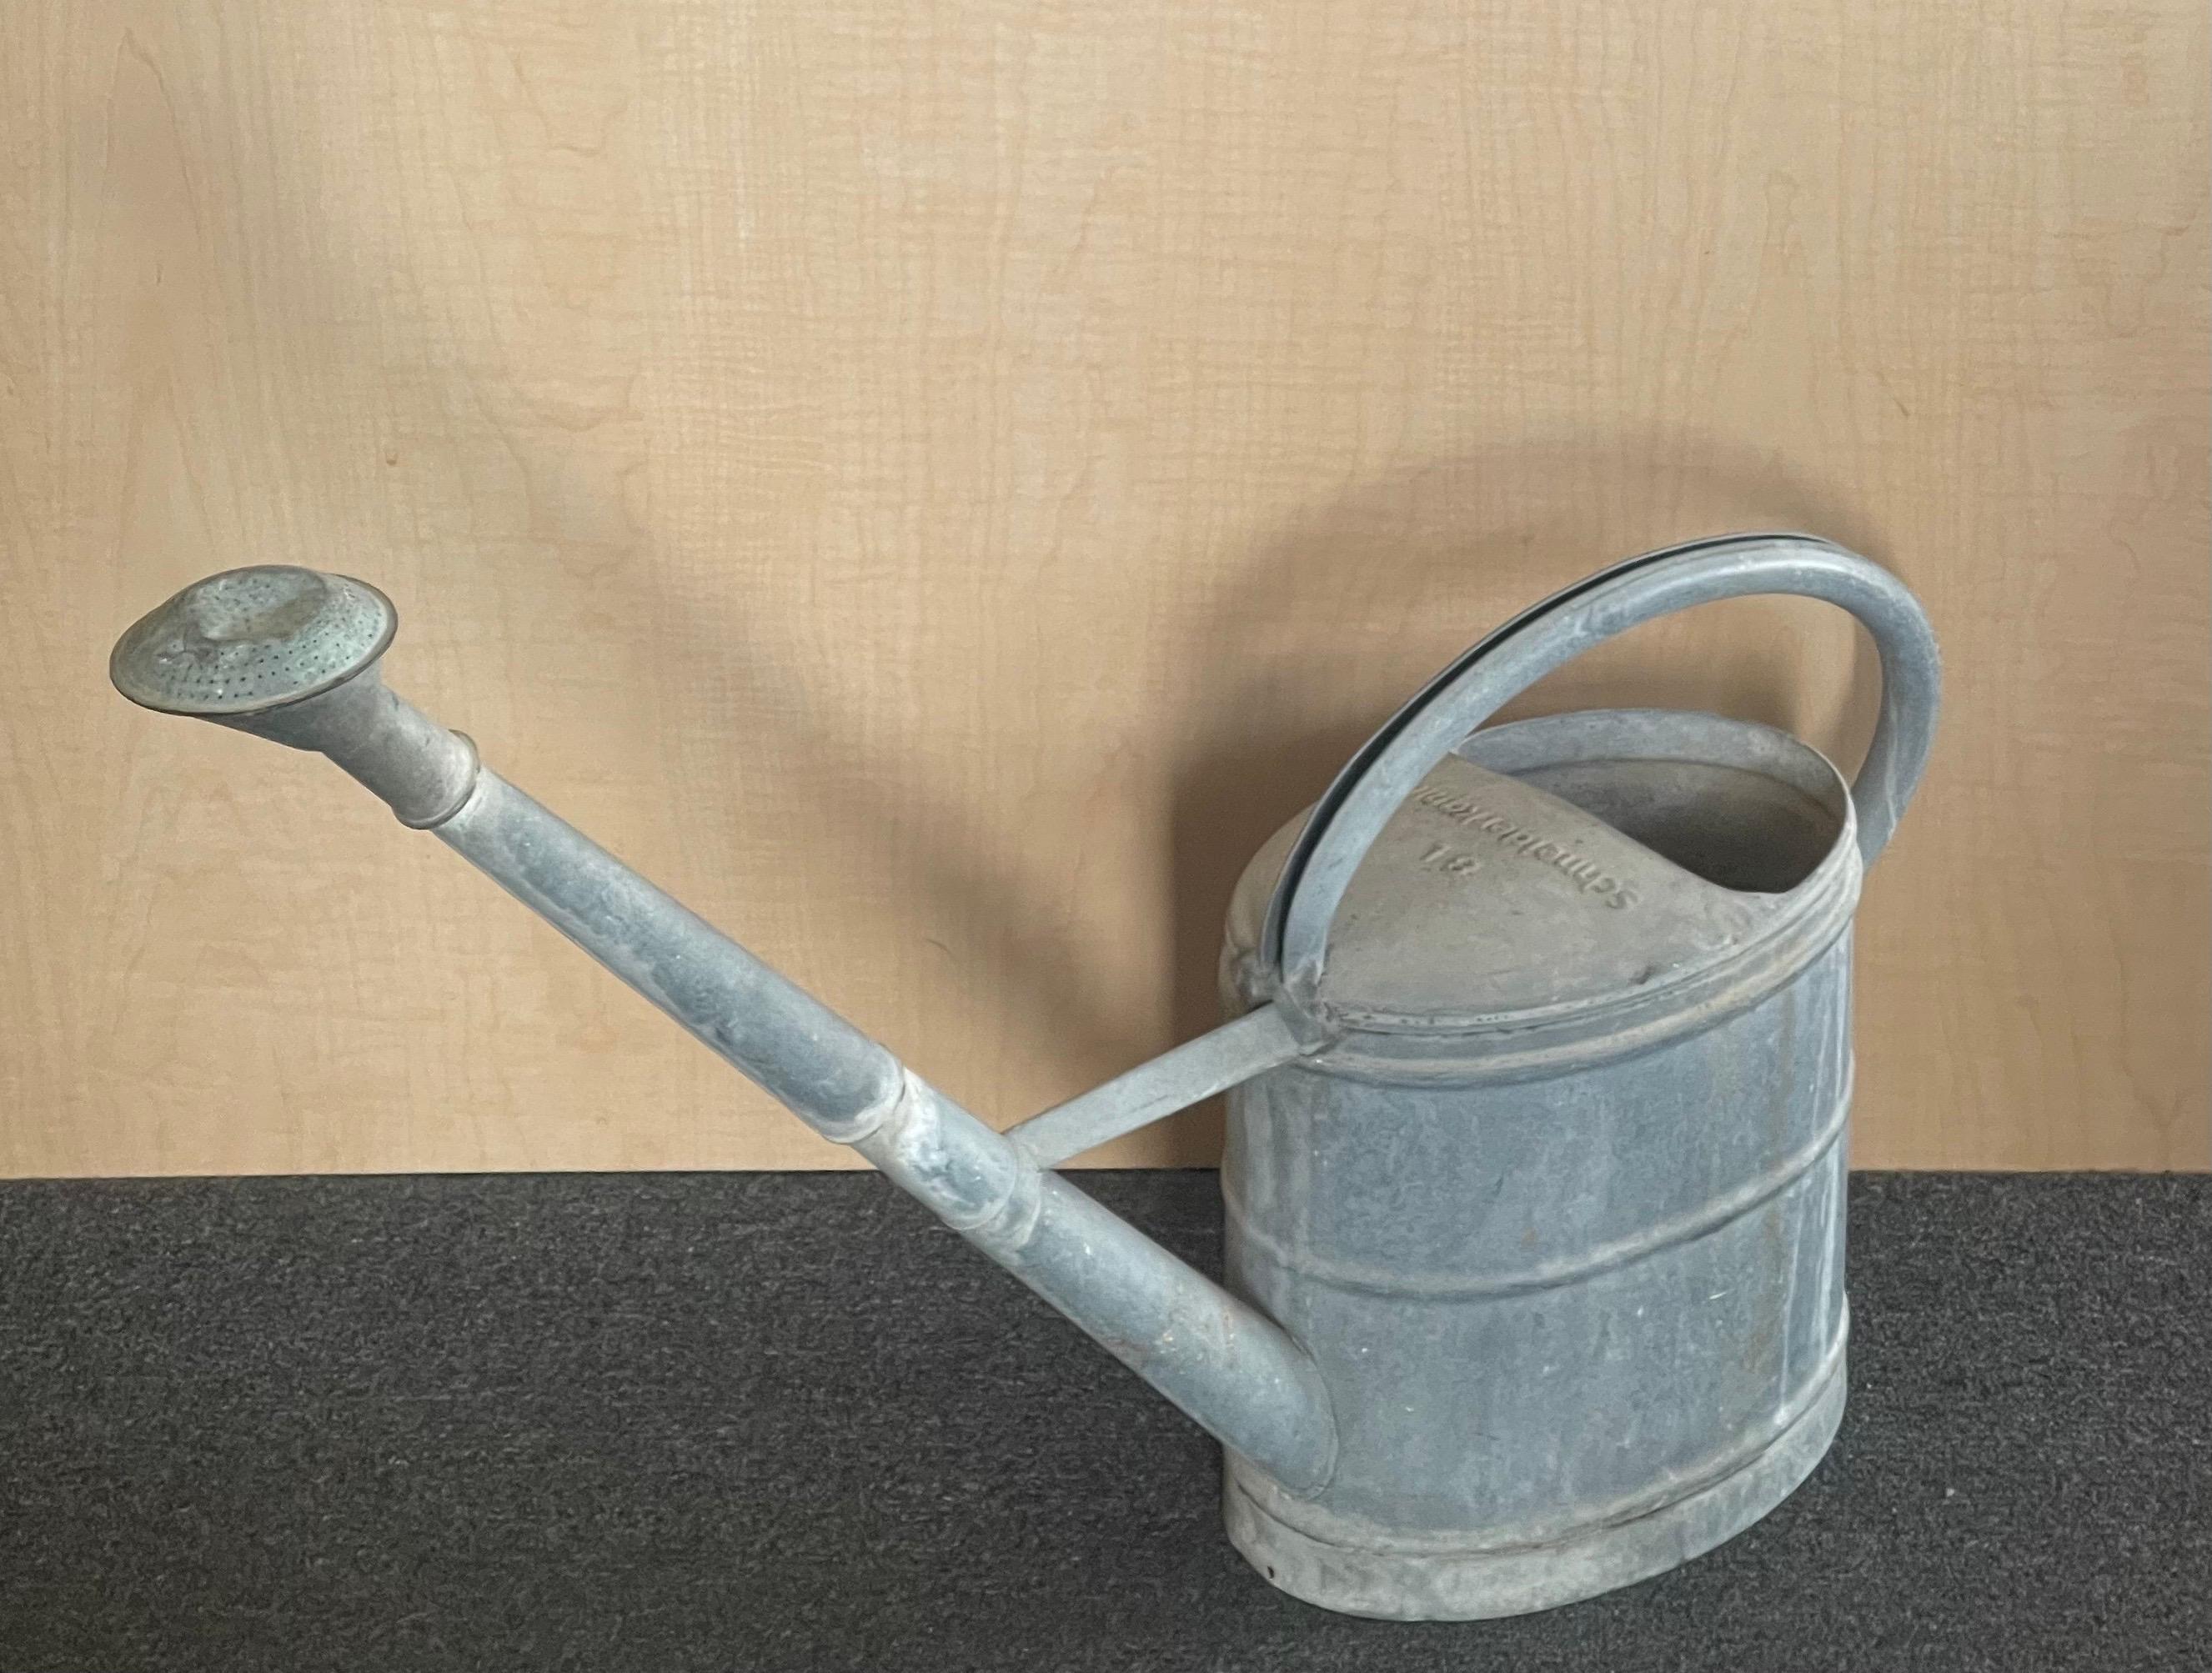 A charming vintage galvanized steel watering can by Schneiderkanne of Germany, circa 1940s. The can is in good vintage condition and measures 31